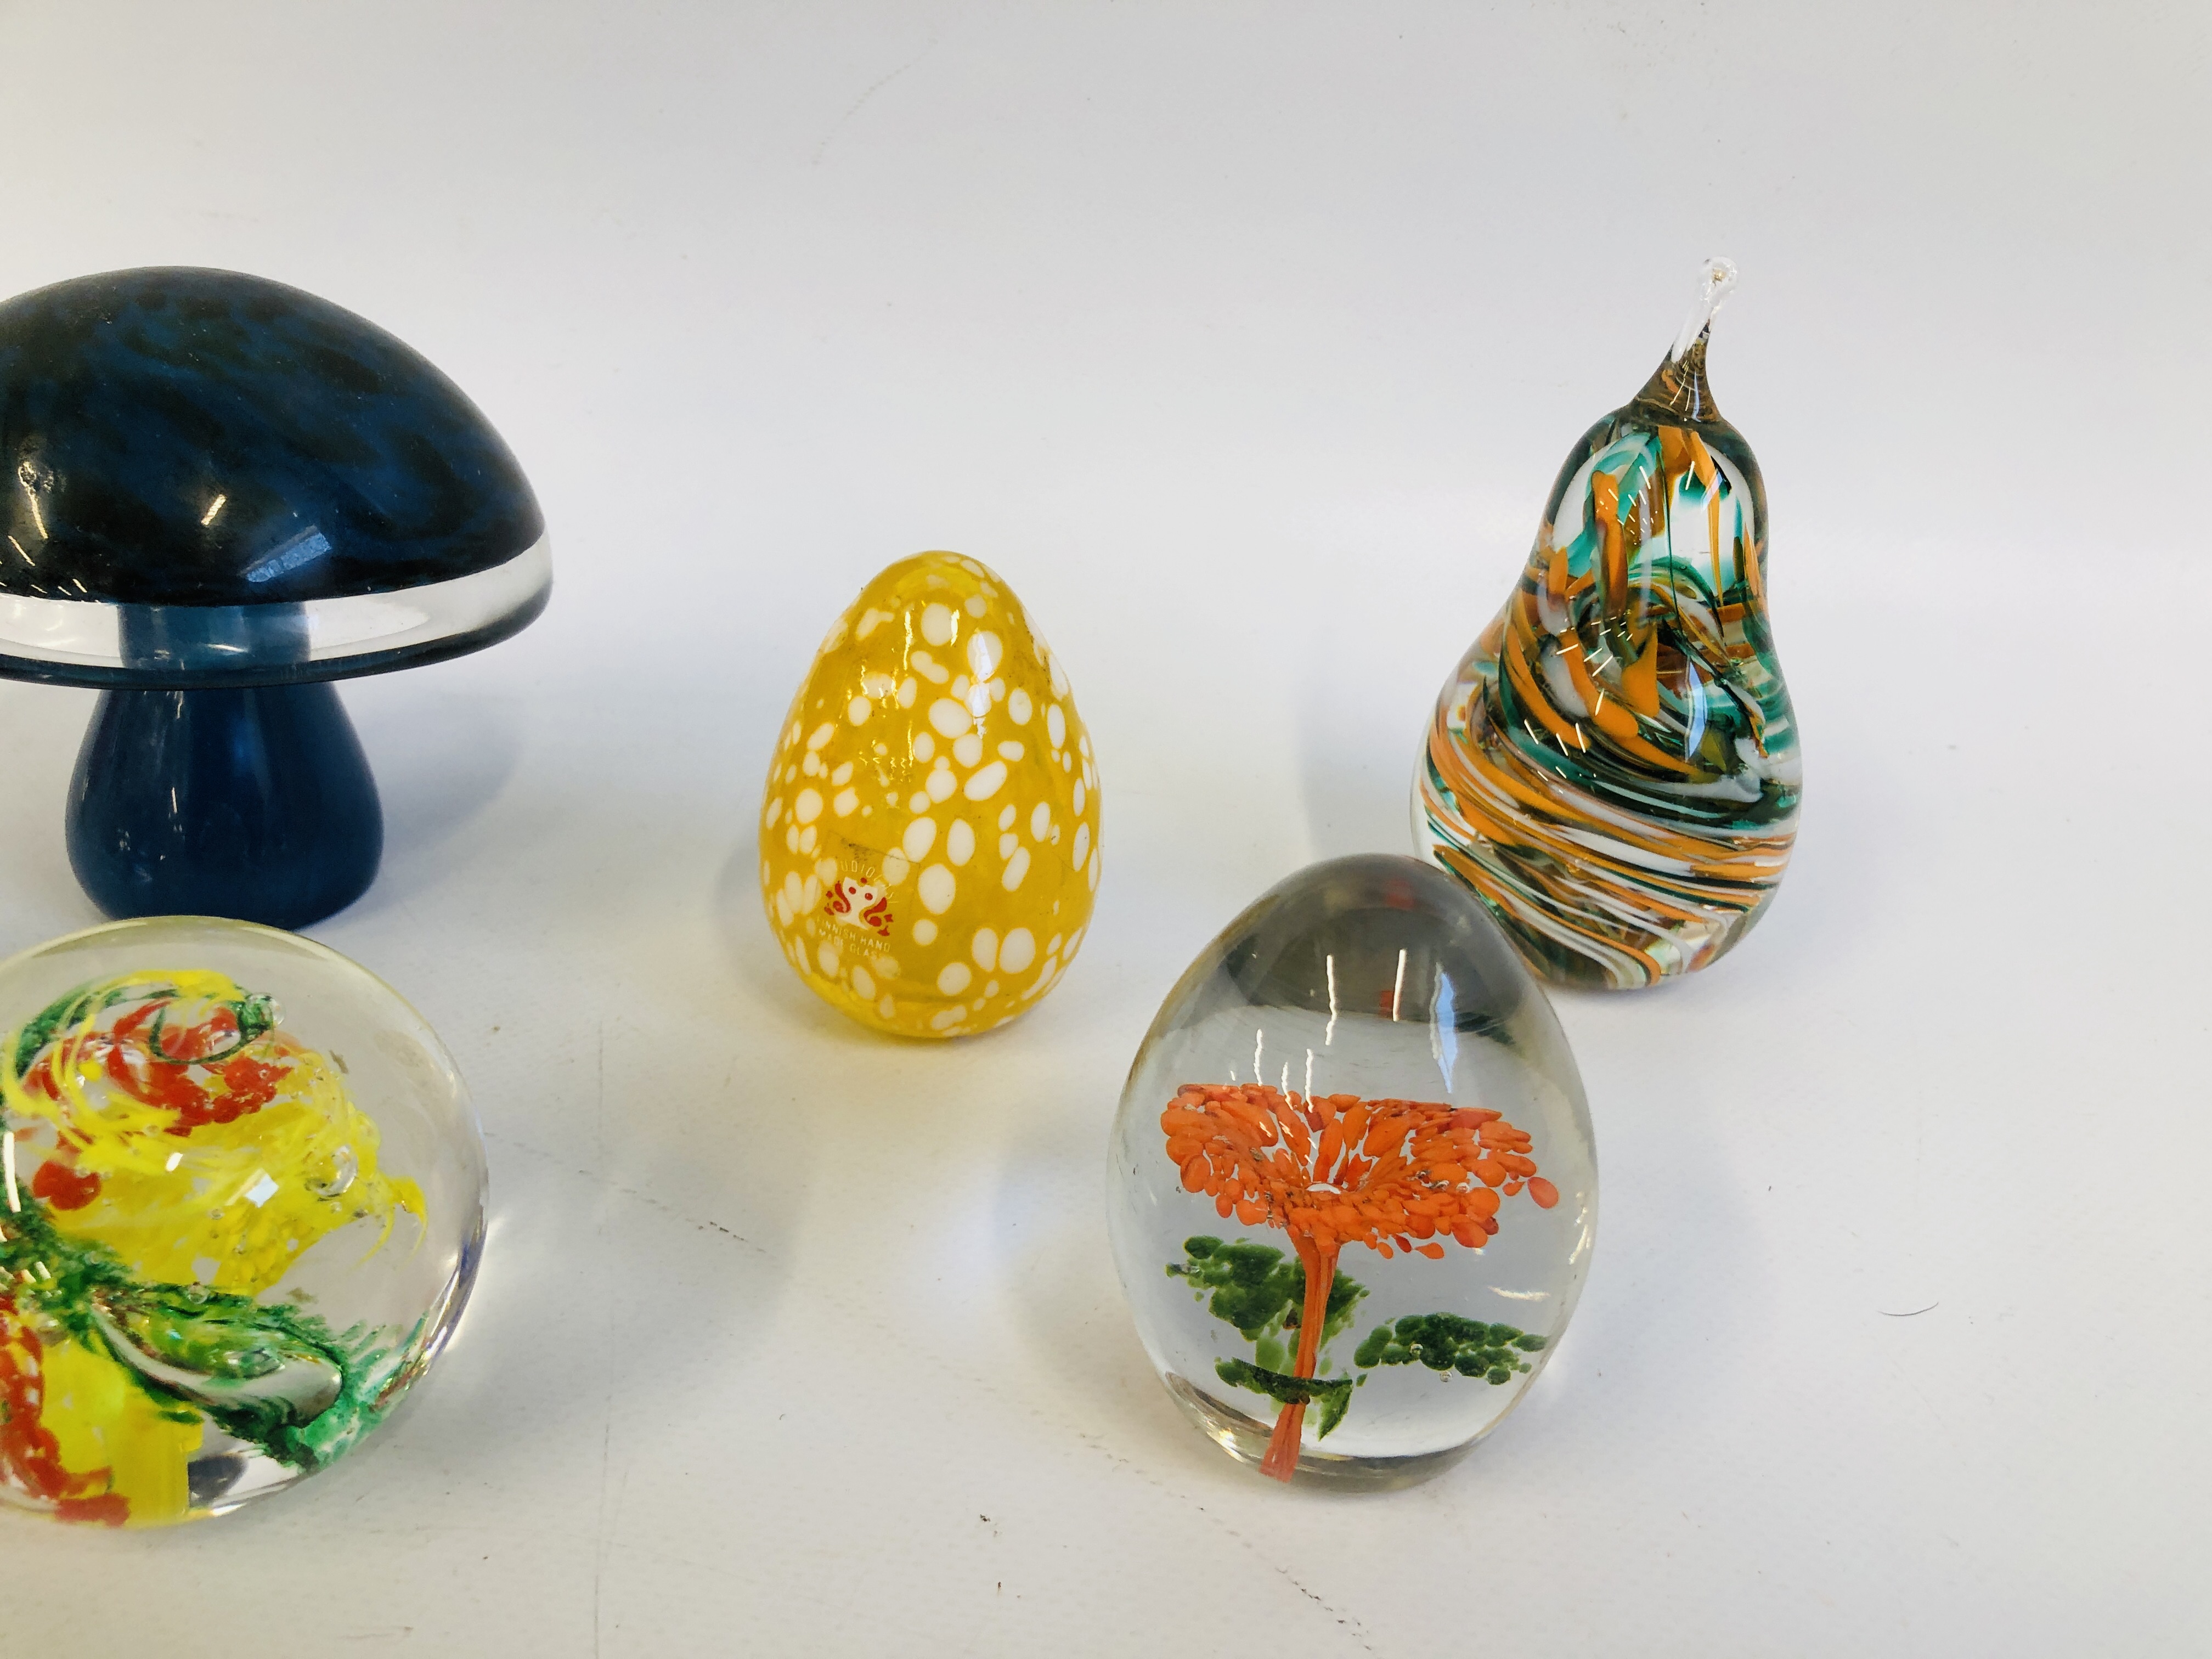 COLLECTION OF 8 ART GLASS PAPERWEIGHTS TO INCLUDE WEDGWOOD MUSHROOM, KERRY GLASS, ETC. - Image 4 of 4